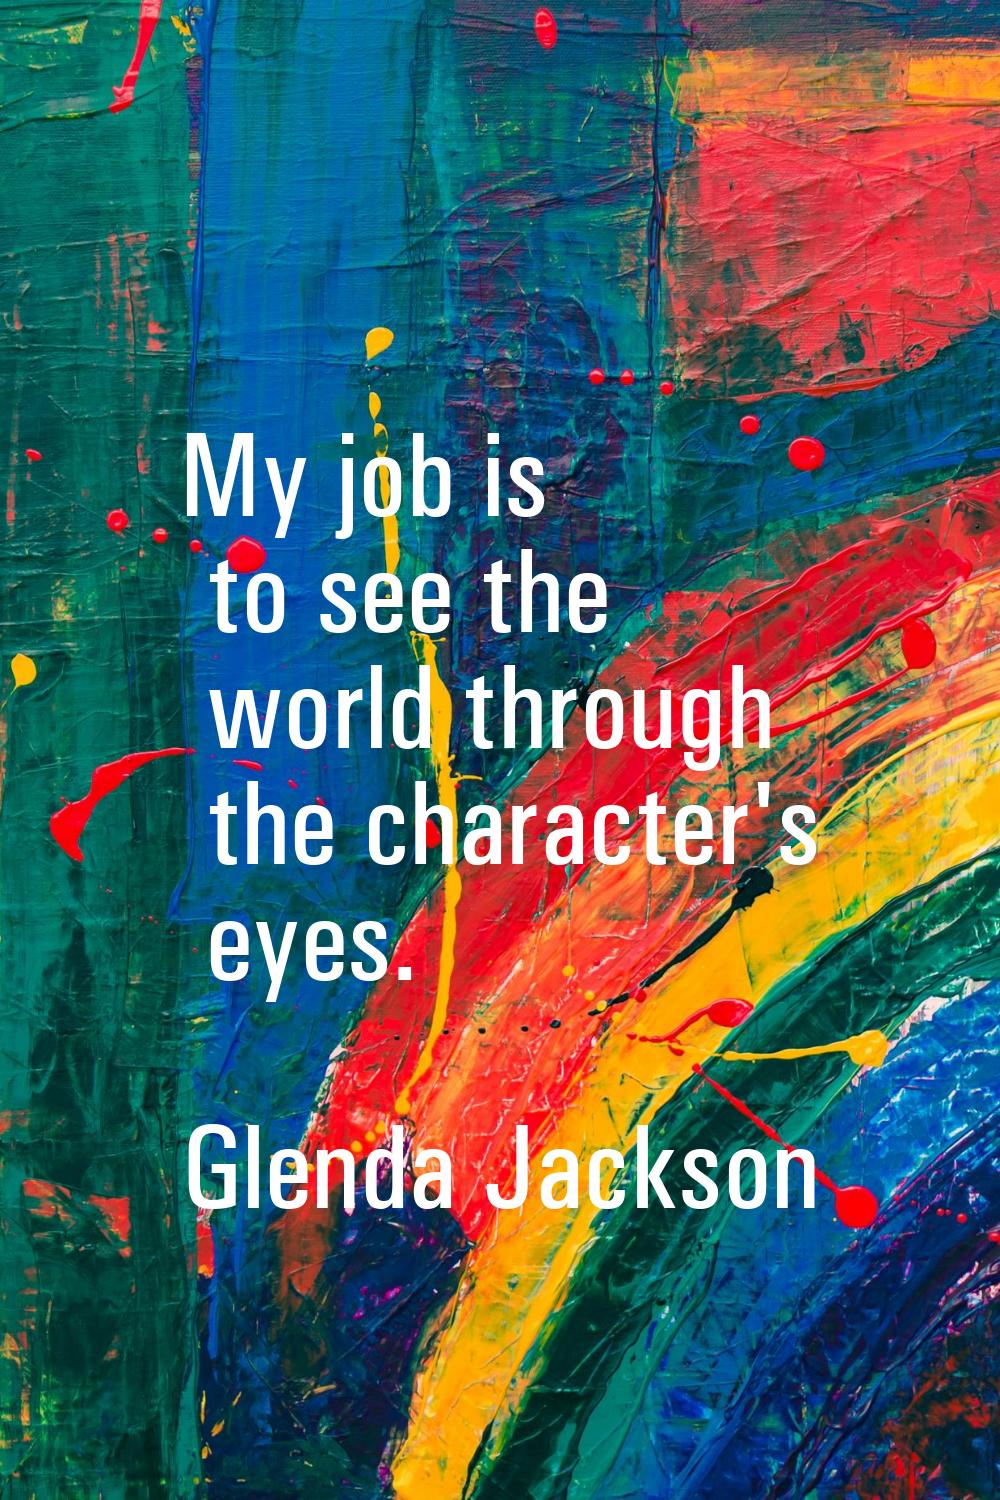 My job is to see the world through the character's eyes.